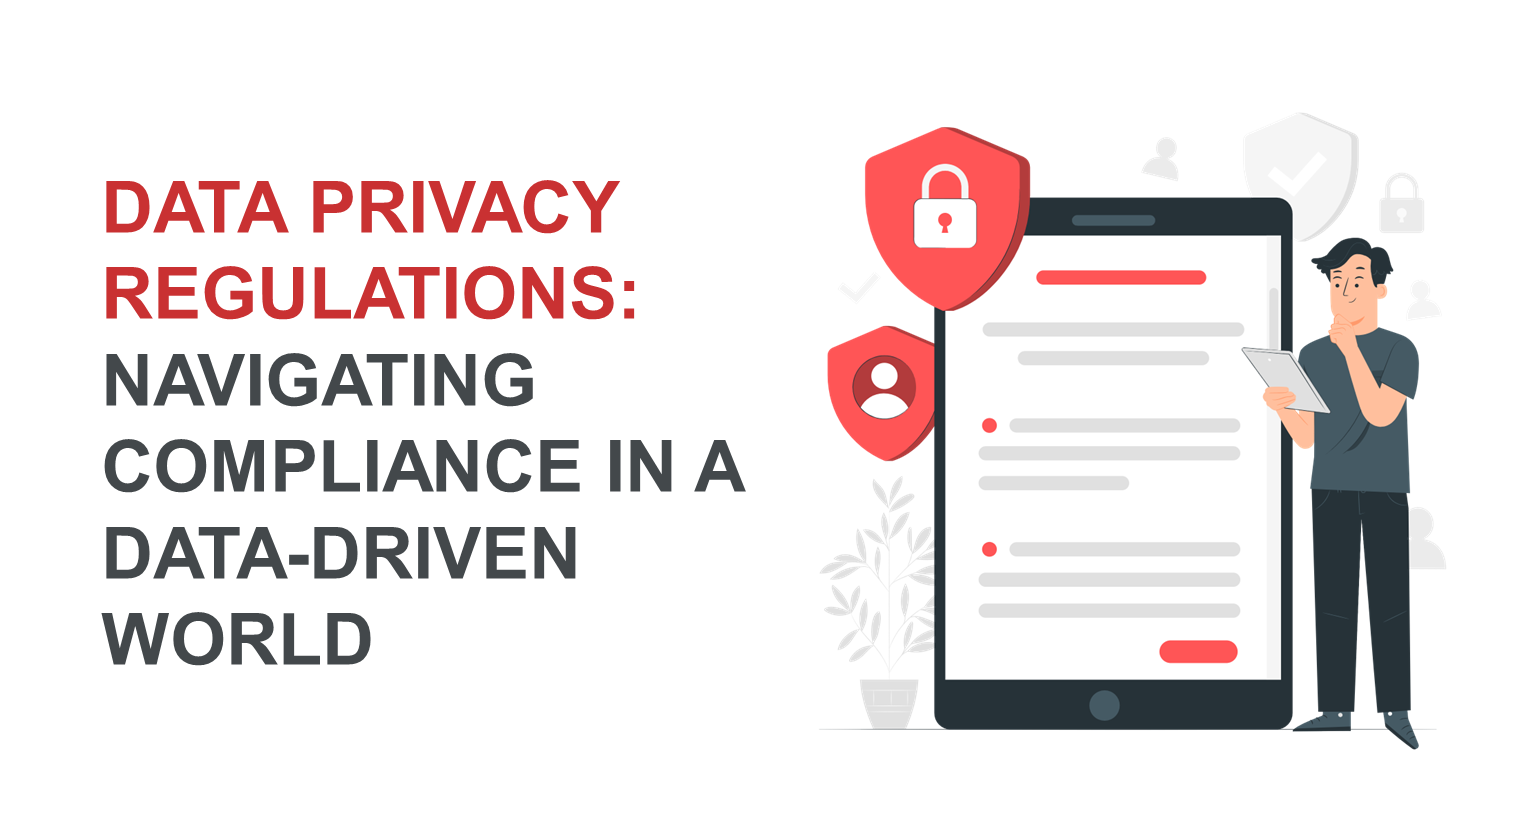 Data Privacy Regulations: Navigating Compliance in a Data-Driven World